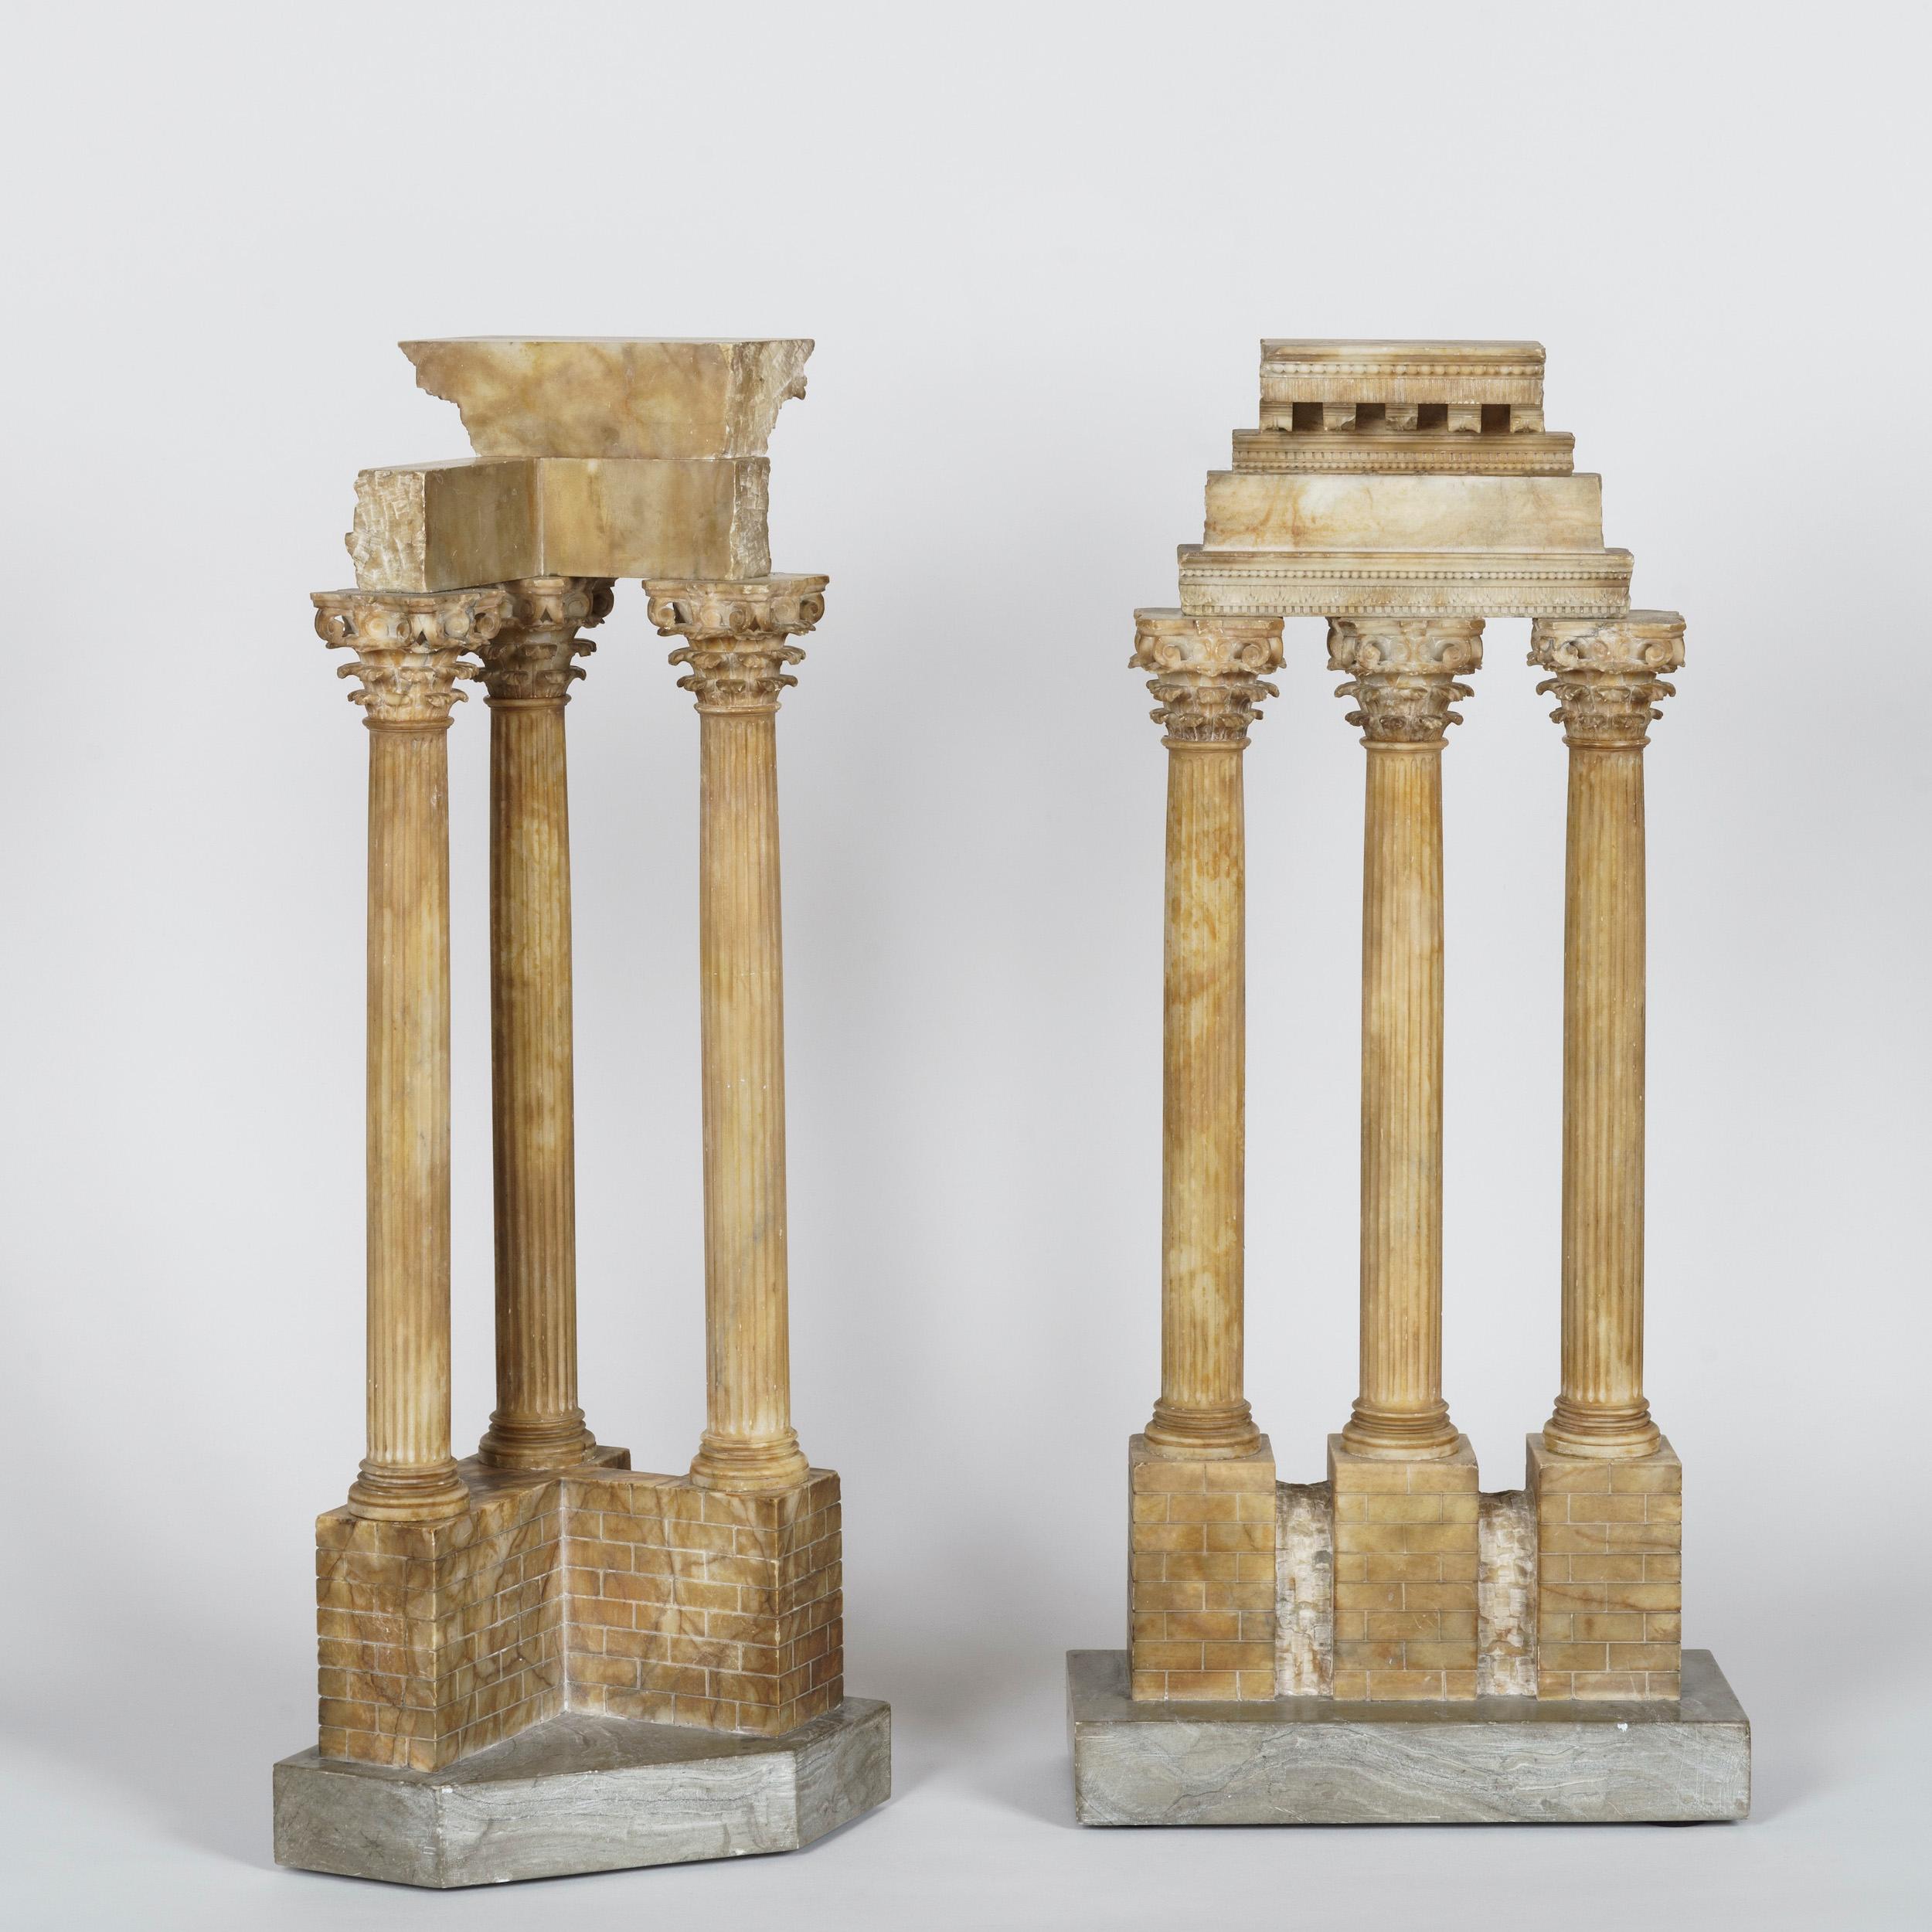 19th Century Pair of 'Grand Tour' Models of the Temples of Vespasian and Castor & Pollux